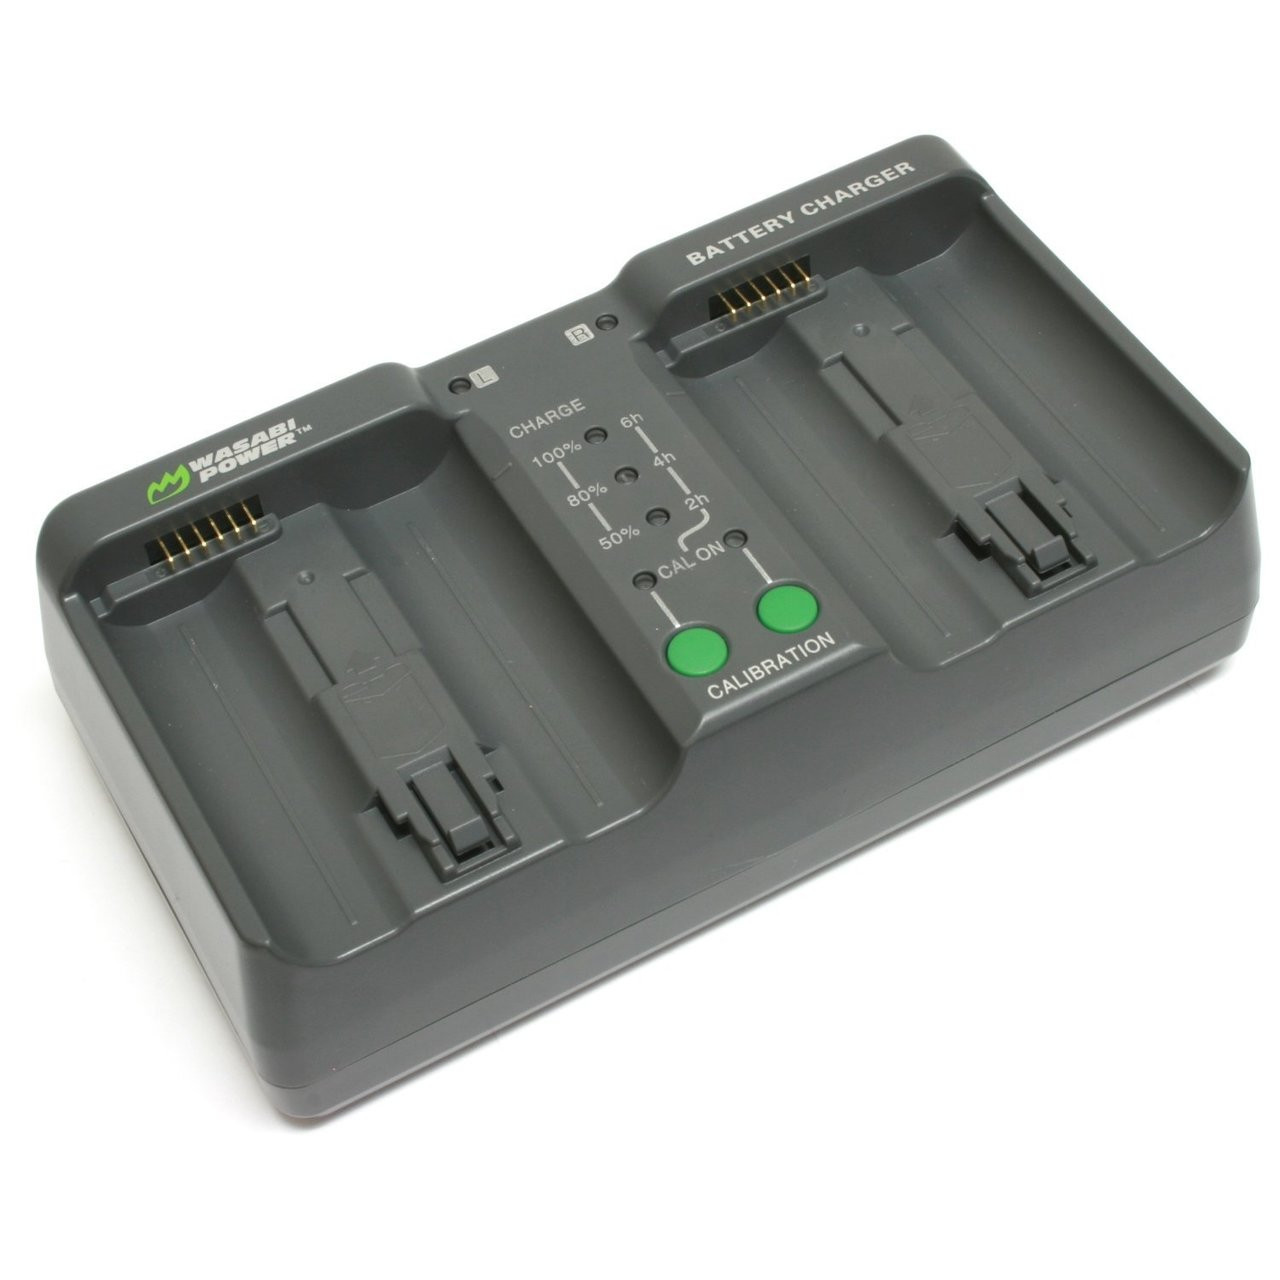 Wasabi Power Dual Battery Charger for Nikon | Bedfords.com